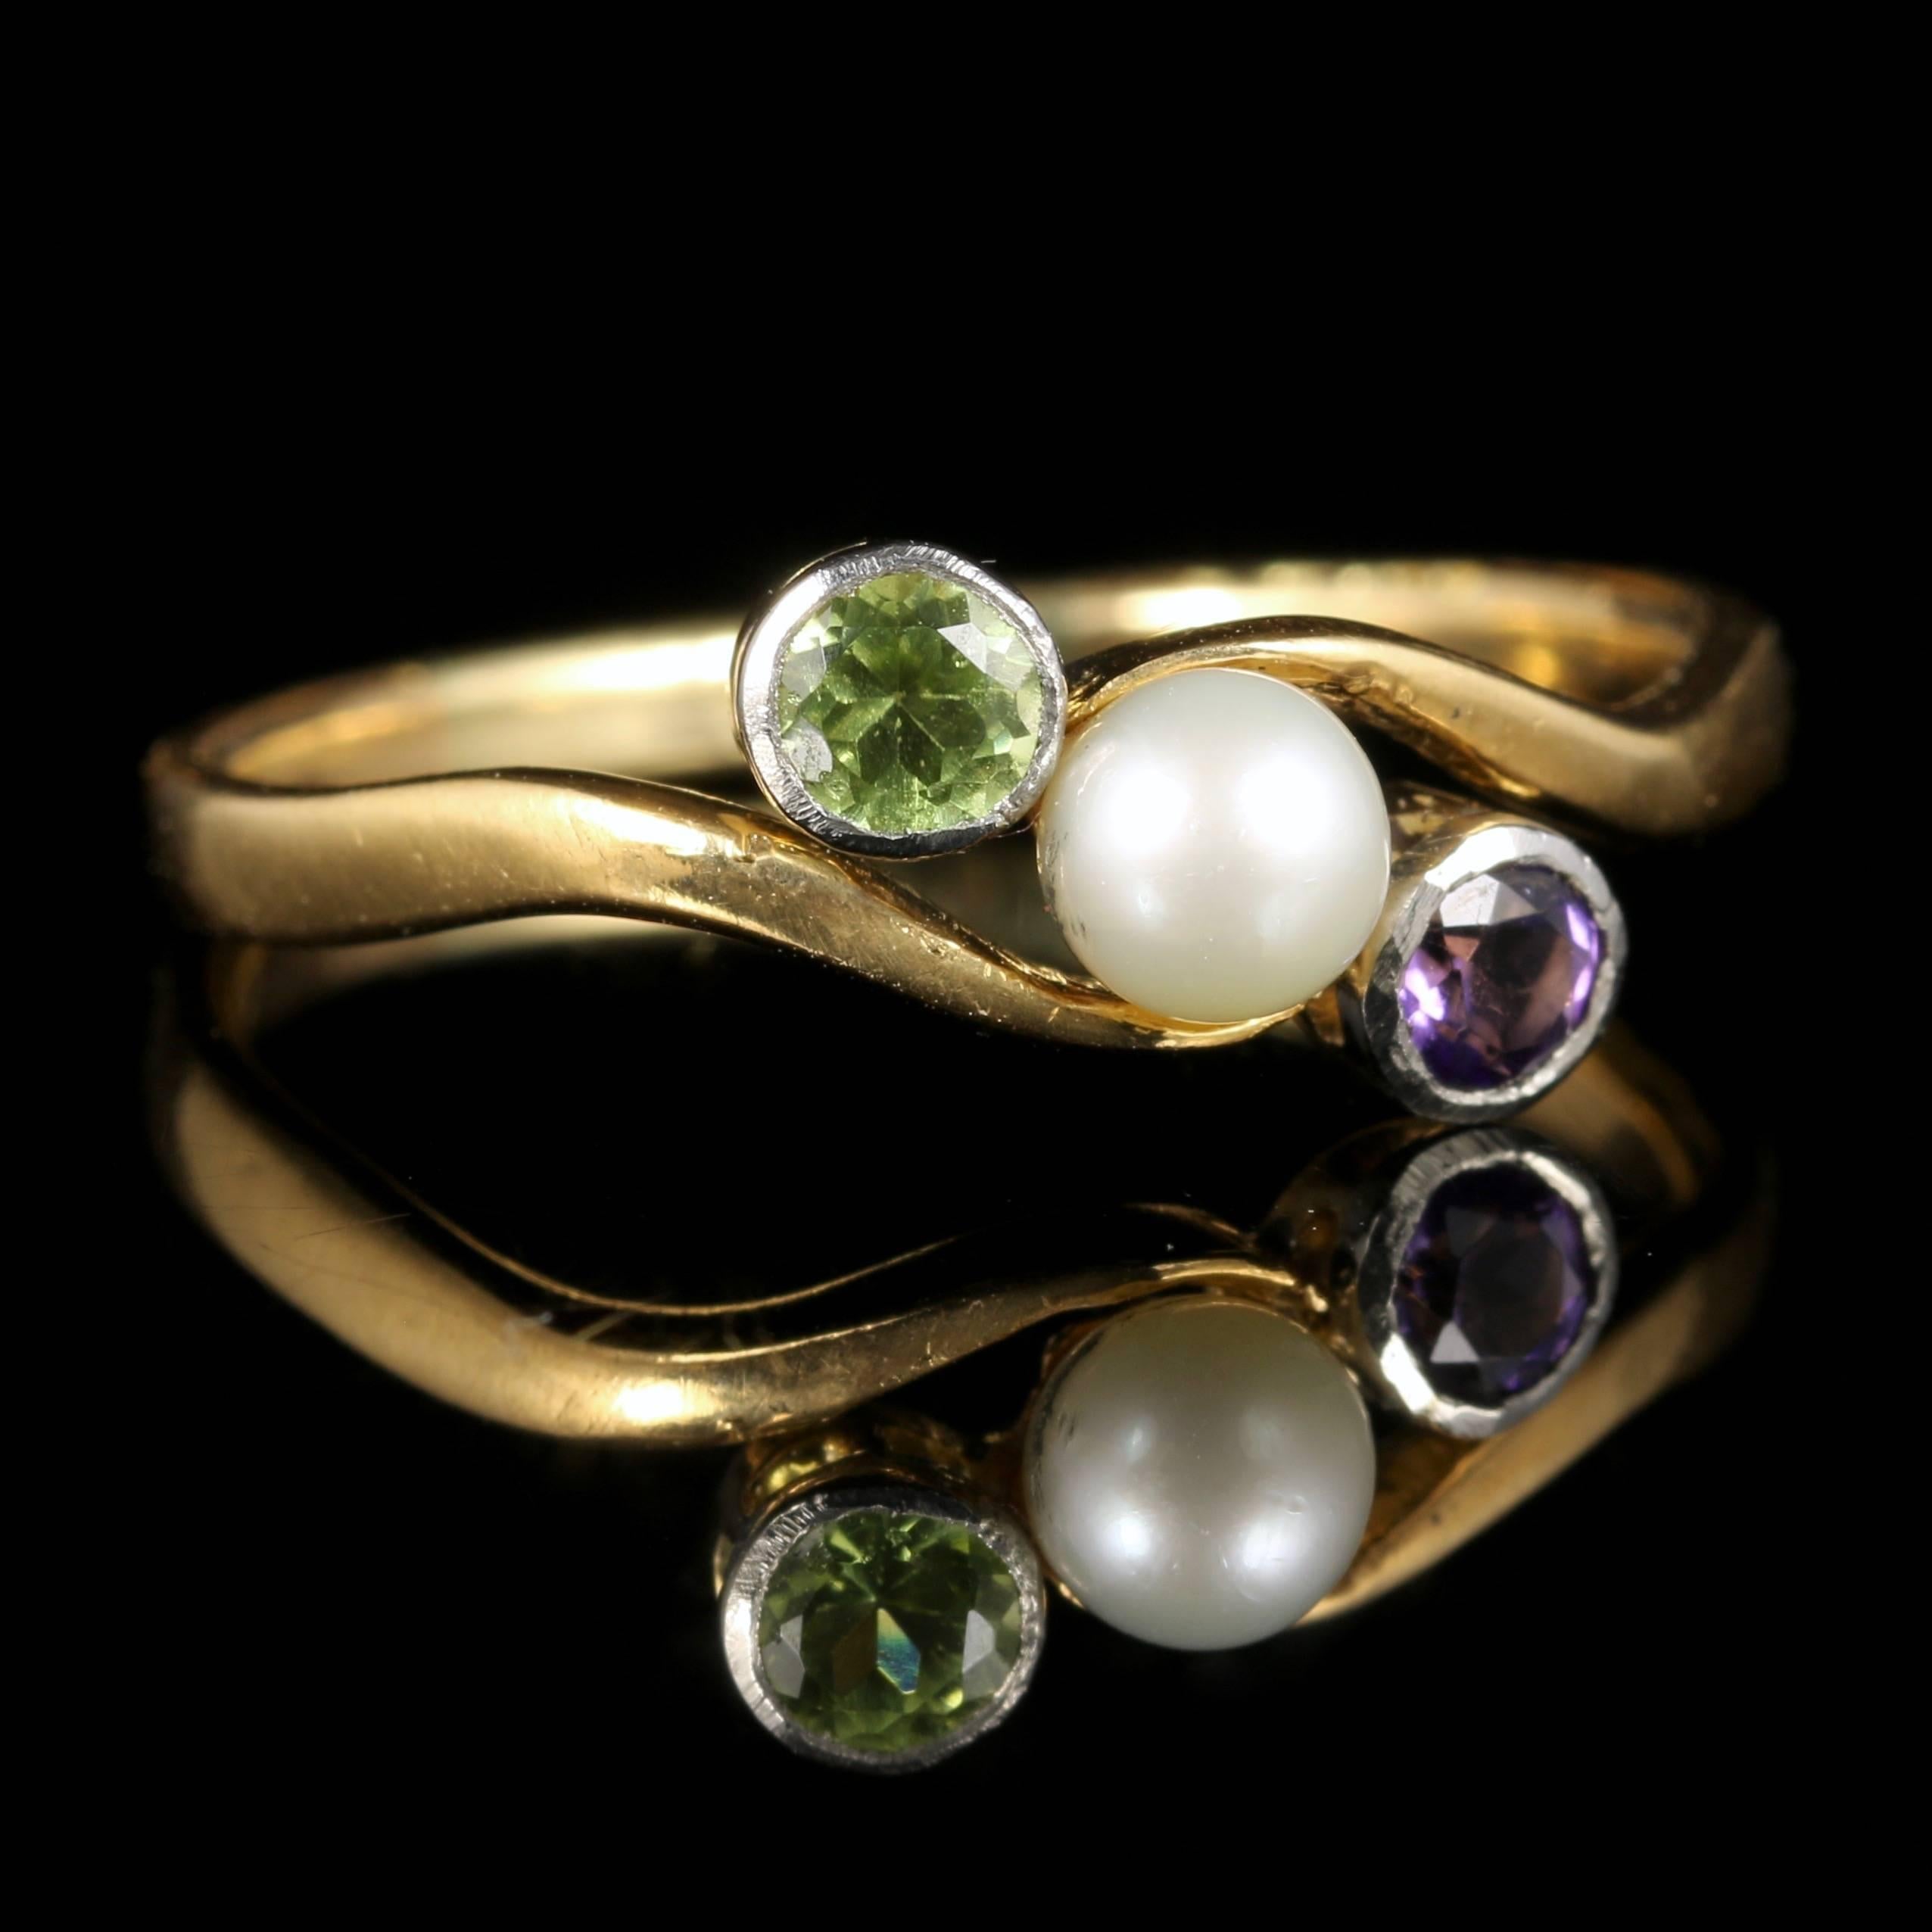 For more details please click continue reading down below...

This fabulous genuine Antique Victorian suffragette ring is set in 18ct Gold.

Circa 1900

Set with a central Pearl and an Amethyst and Peridot either side.

The trilogy of gemstones sit